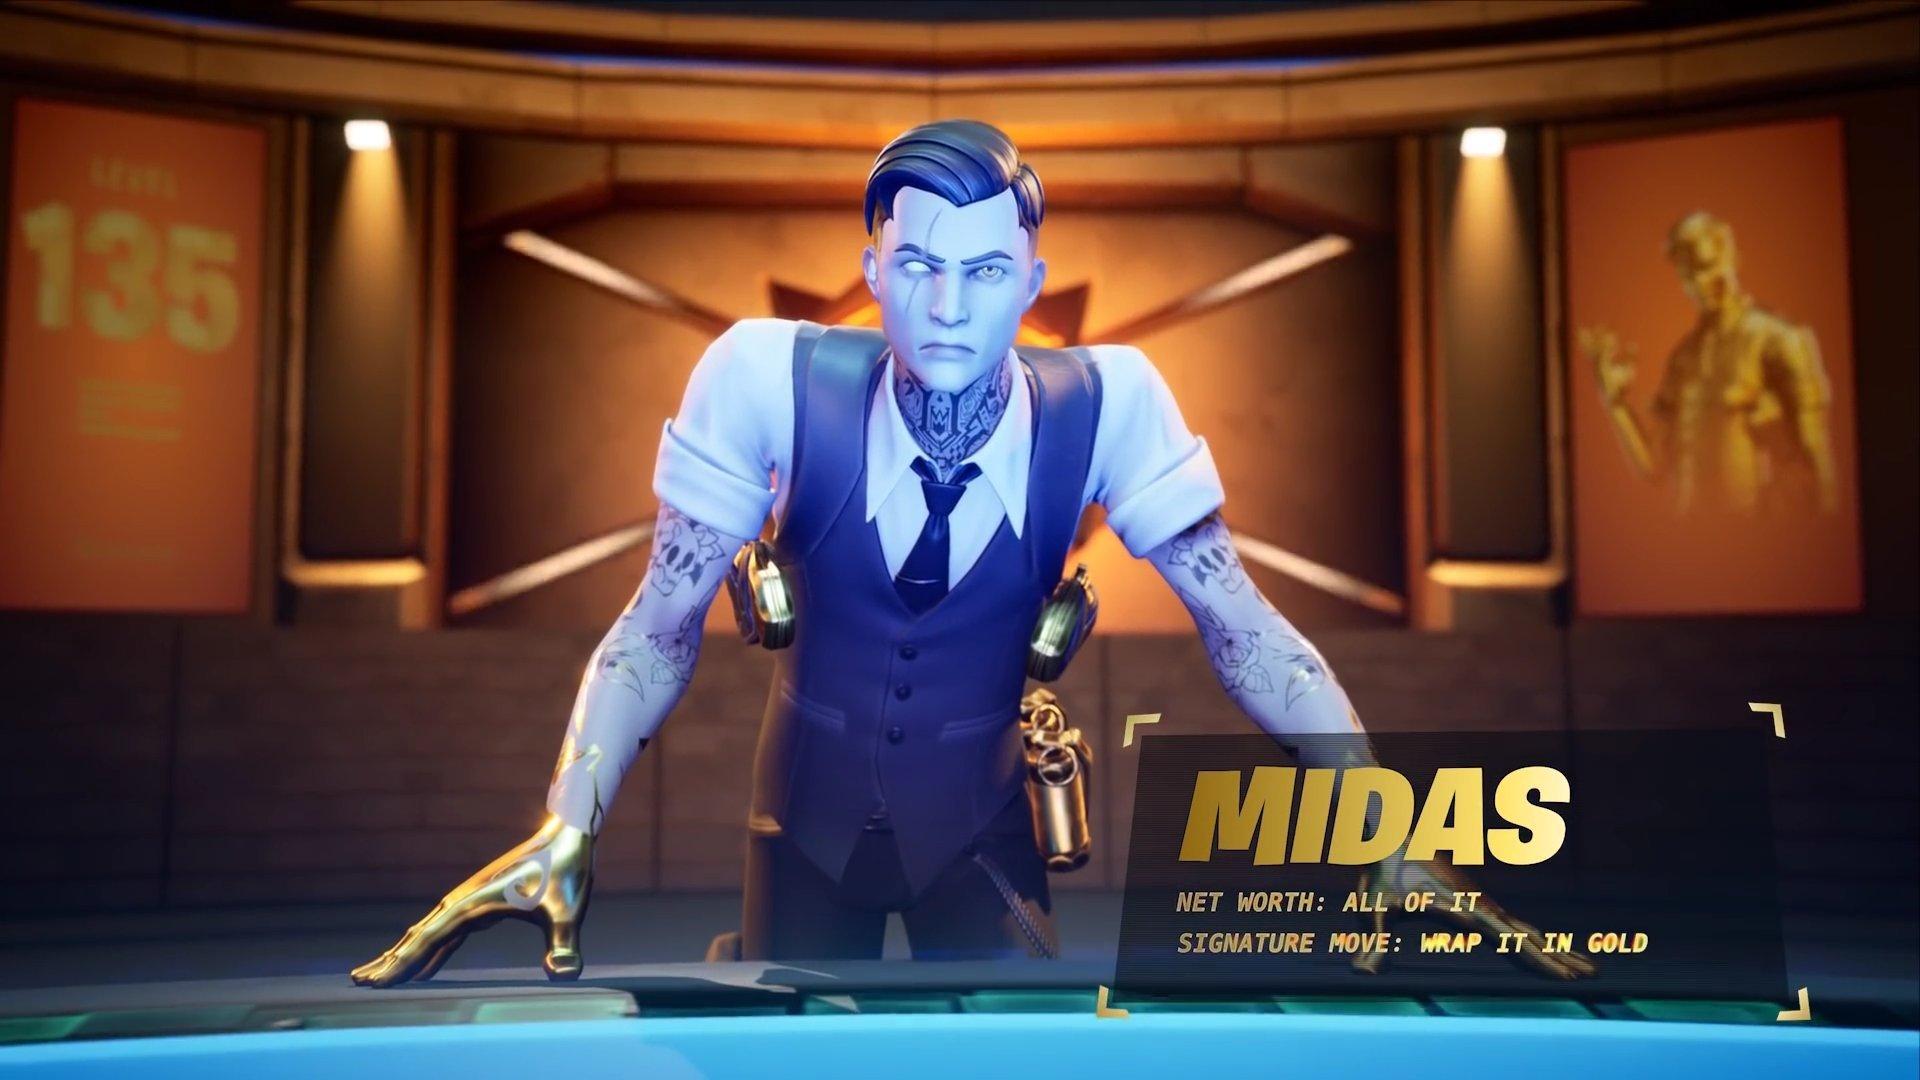 Download wallpapers Golden Agent Midas 4k yellow neon lights Fortnite  Battle Royale Fortnite characters Golden Agent Midas Skin Fortnite  Golden Agent Midas Fortnite for desktop with resolution 3840x2400 High  Quality HD pictures